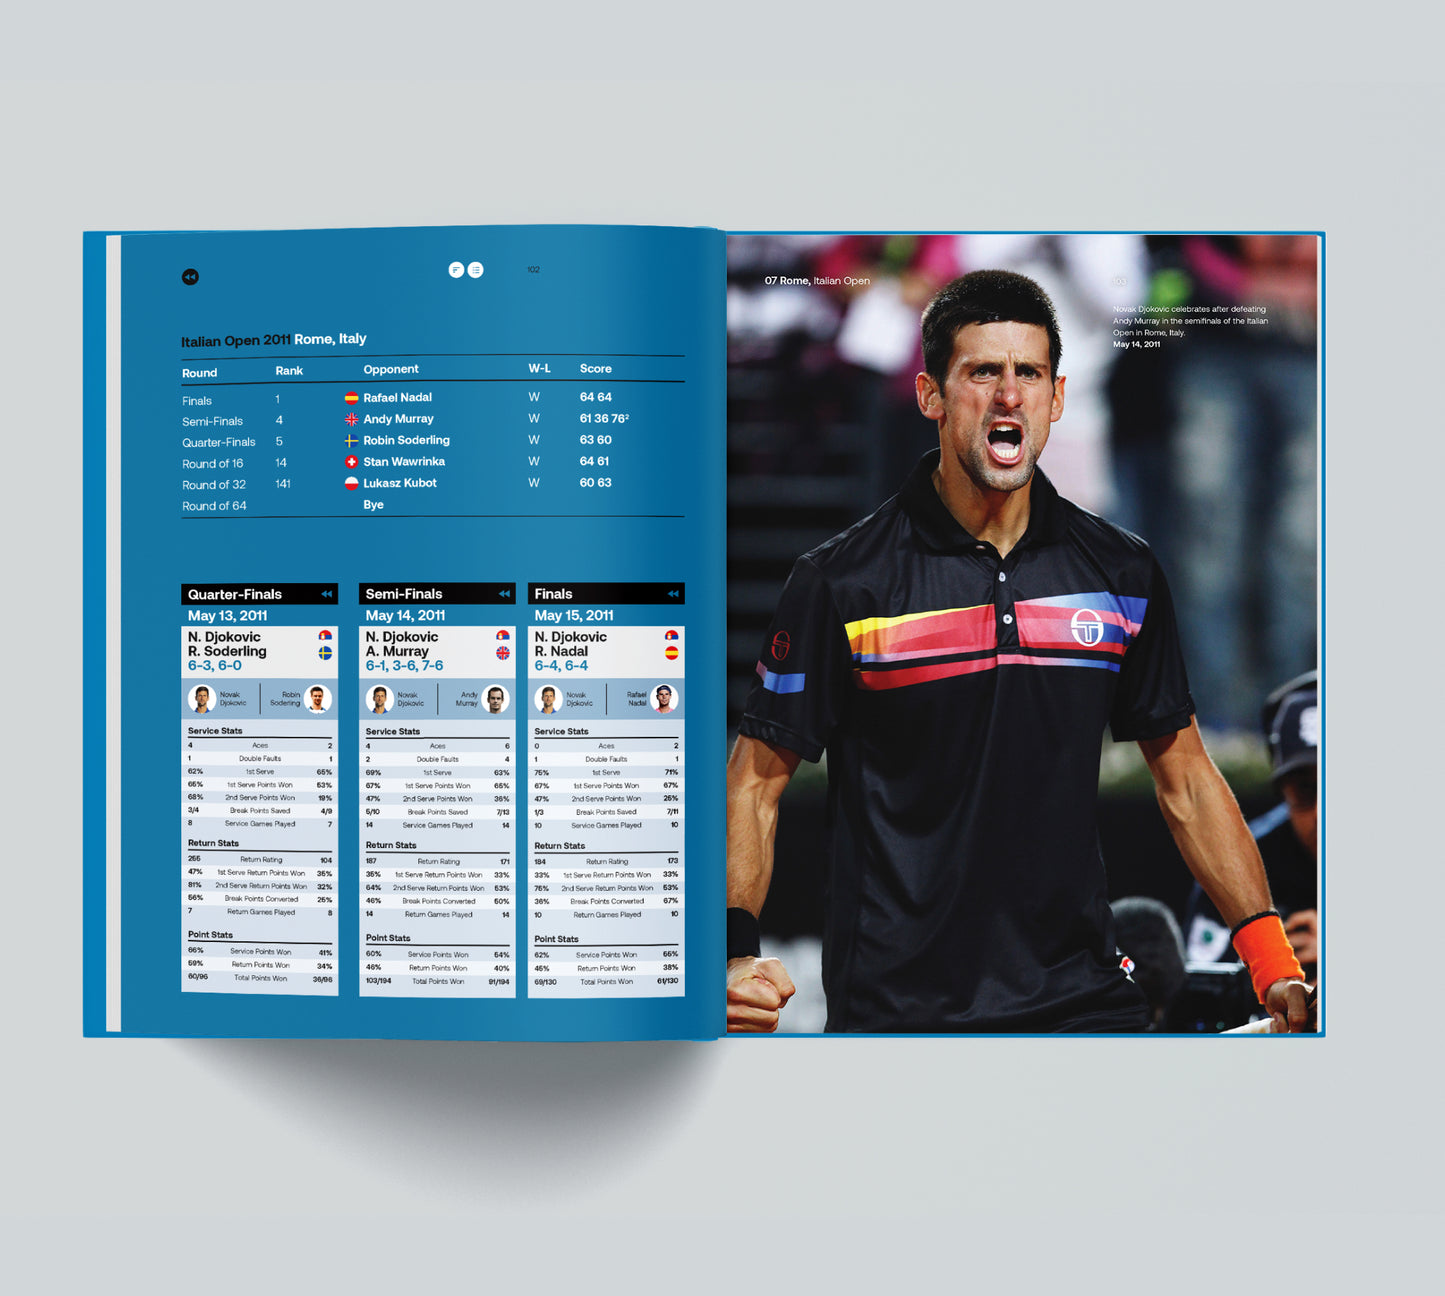 Novak Djokovic 2011: only available in sets